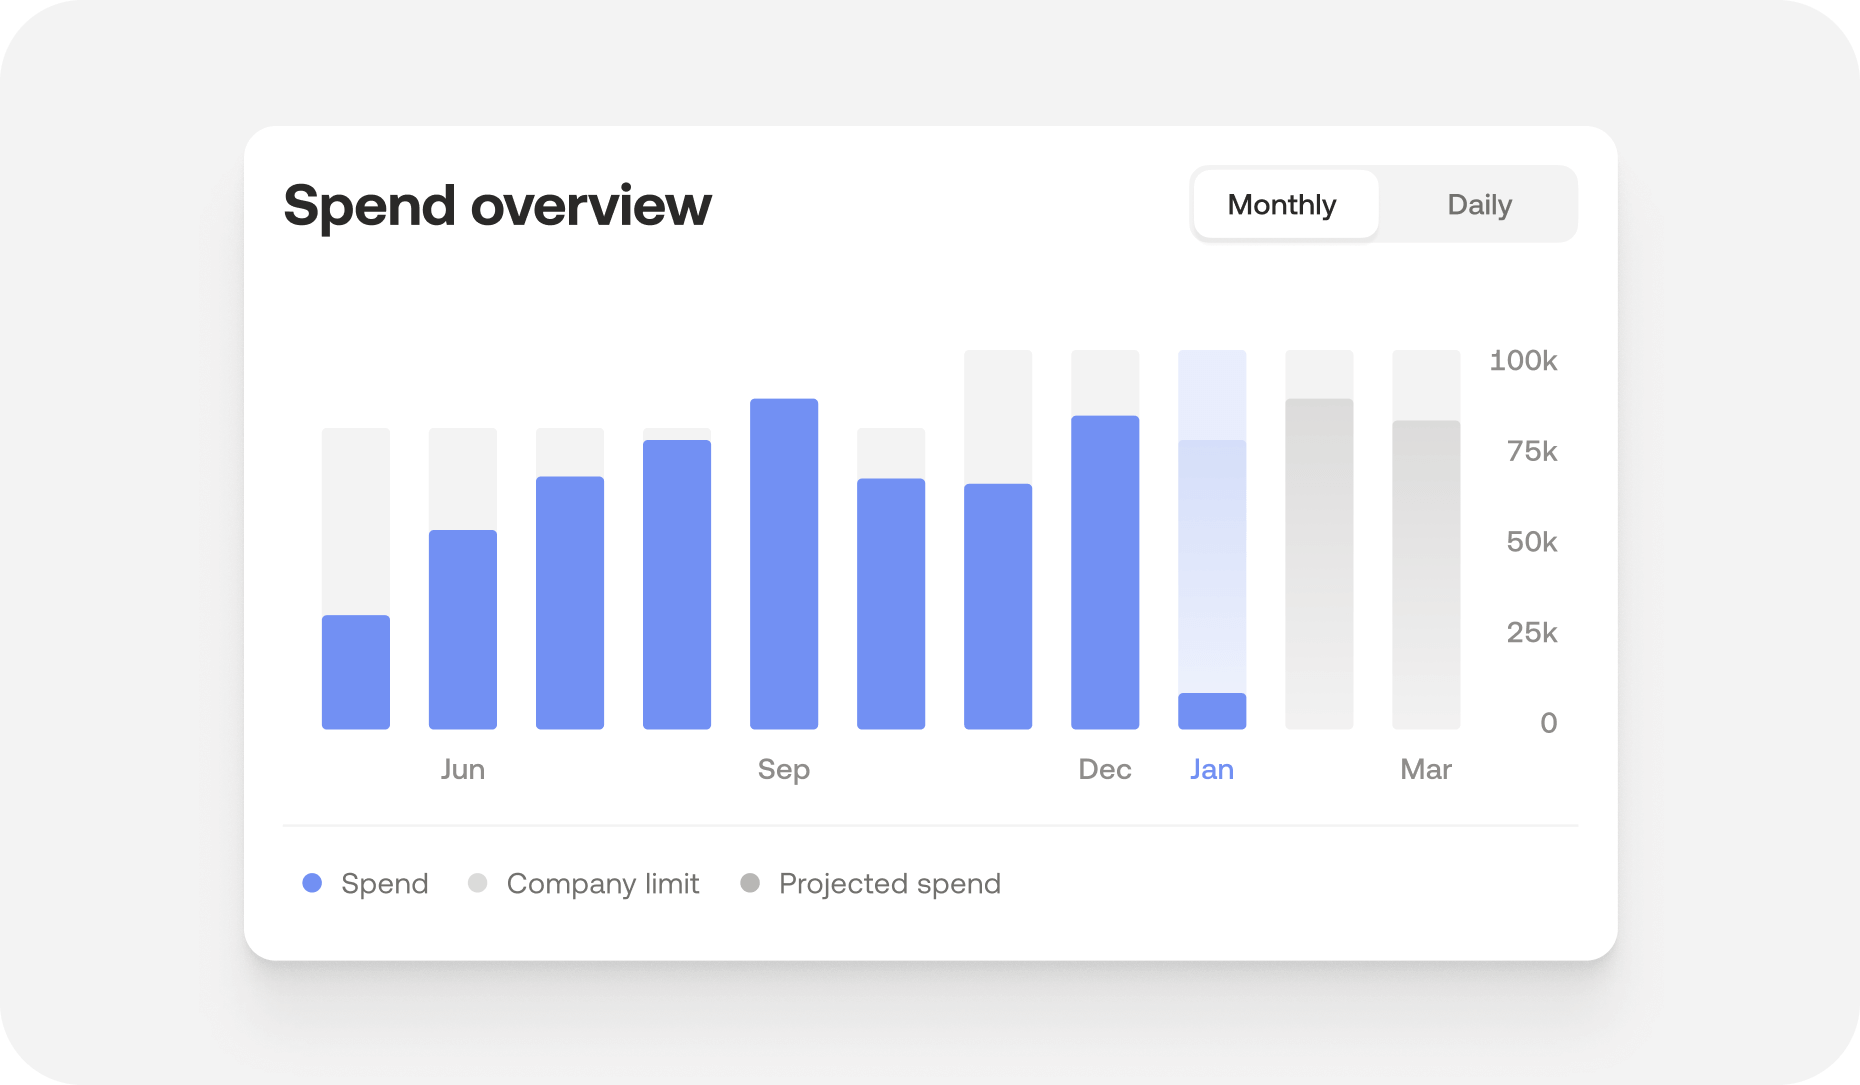 Spend overview